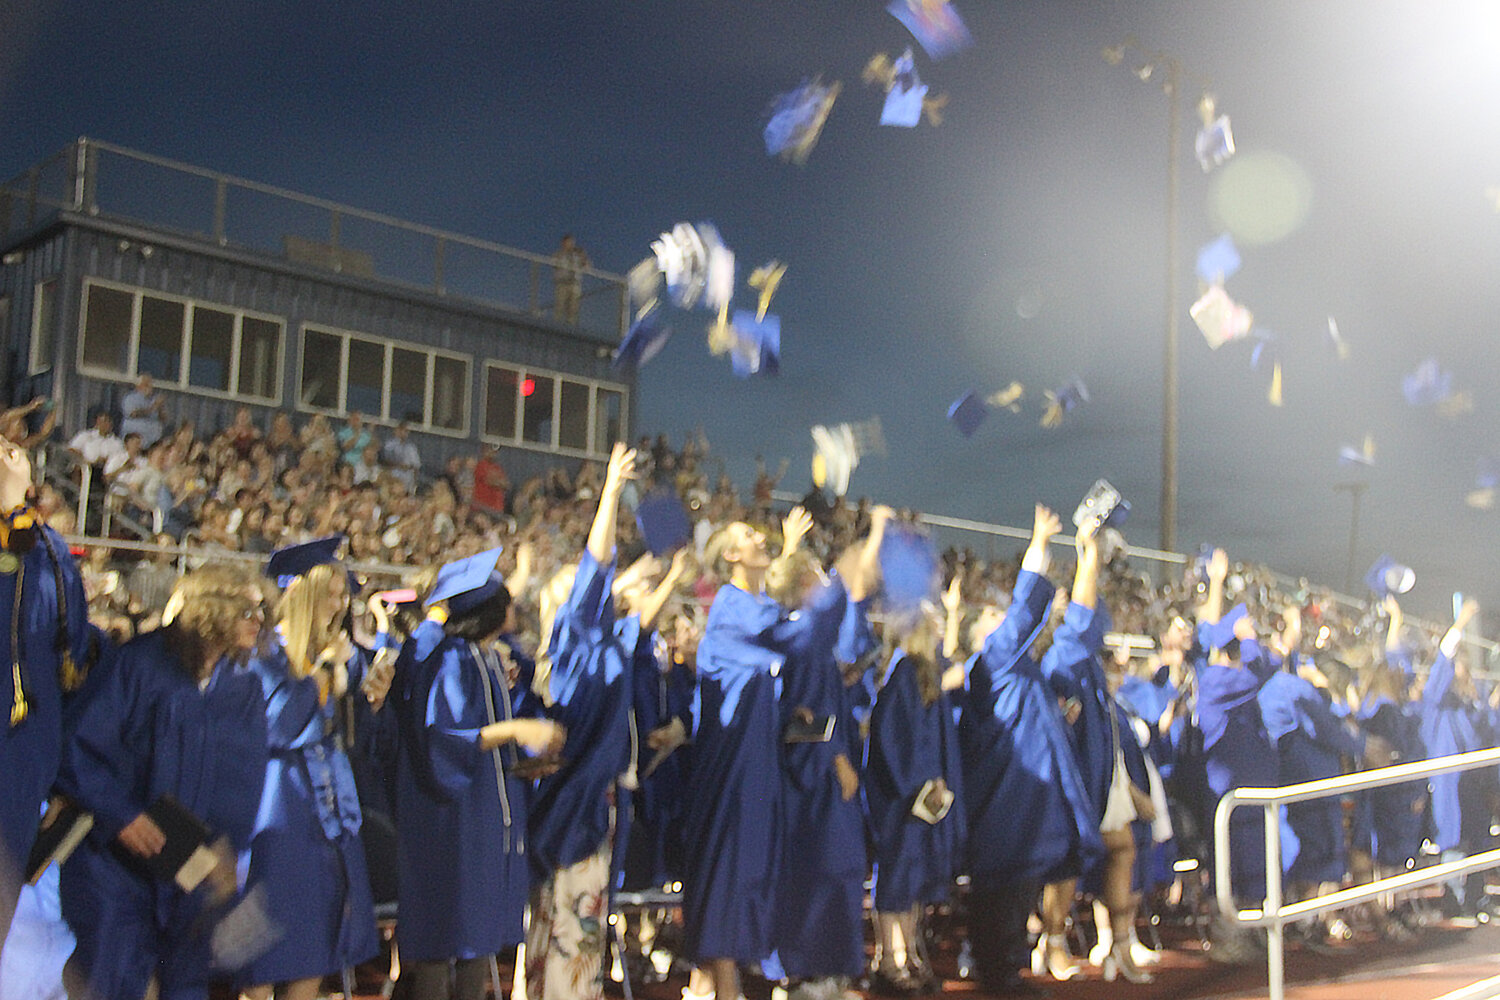 The newest Wright City High School graduates toss their caps in the air at the end of the ceremony.